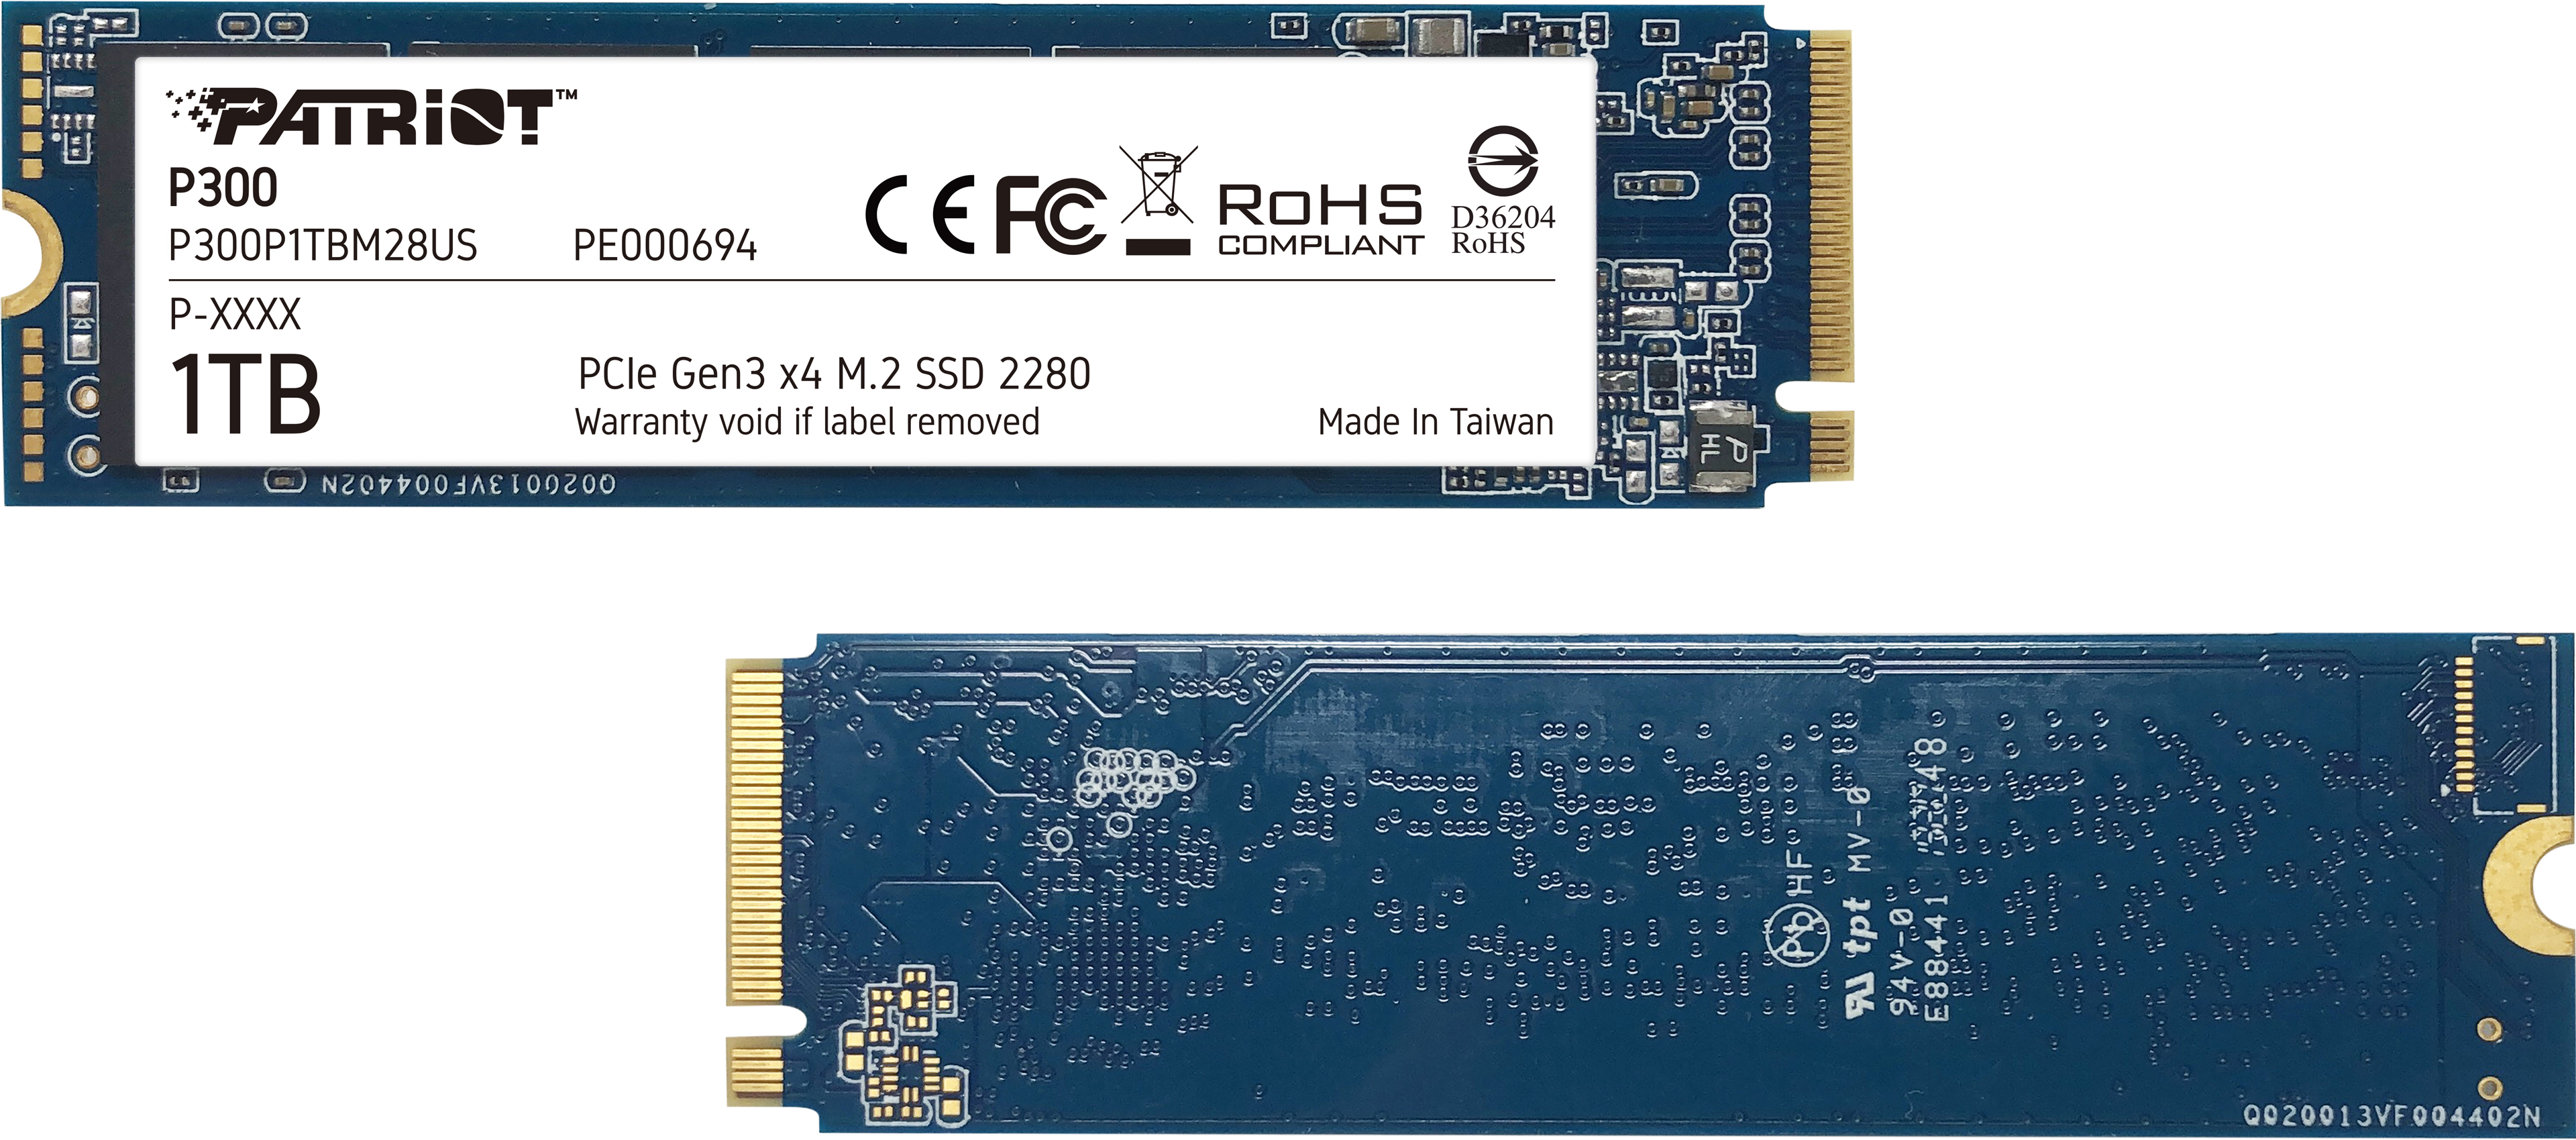 Patriot Releases Cheap P300 M.2 PCIe SSDs: Two Products, Same Name